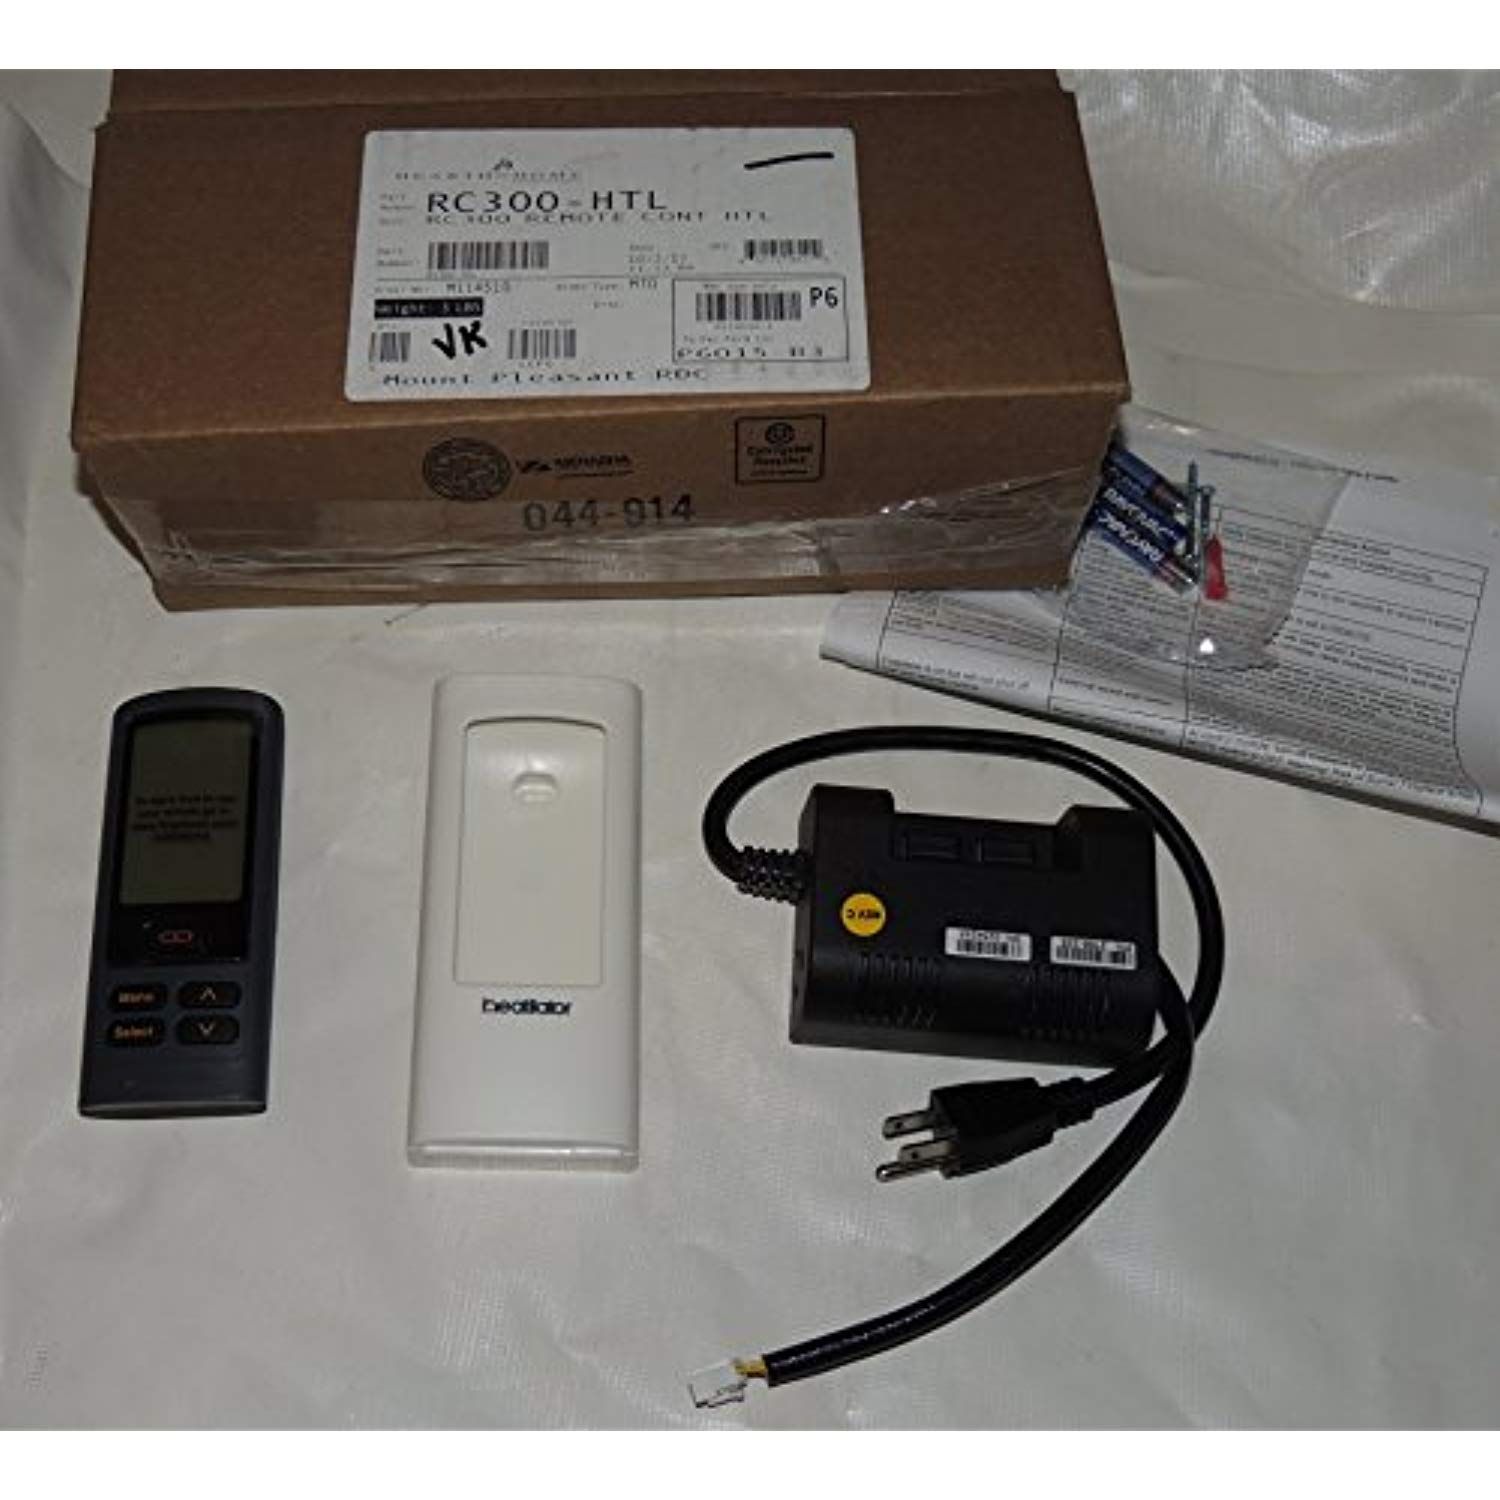 Fireplace Remote Replacement New Heatilator Rc300 Htl Gas Fireplace and Insert Remote Control